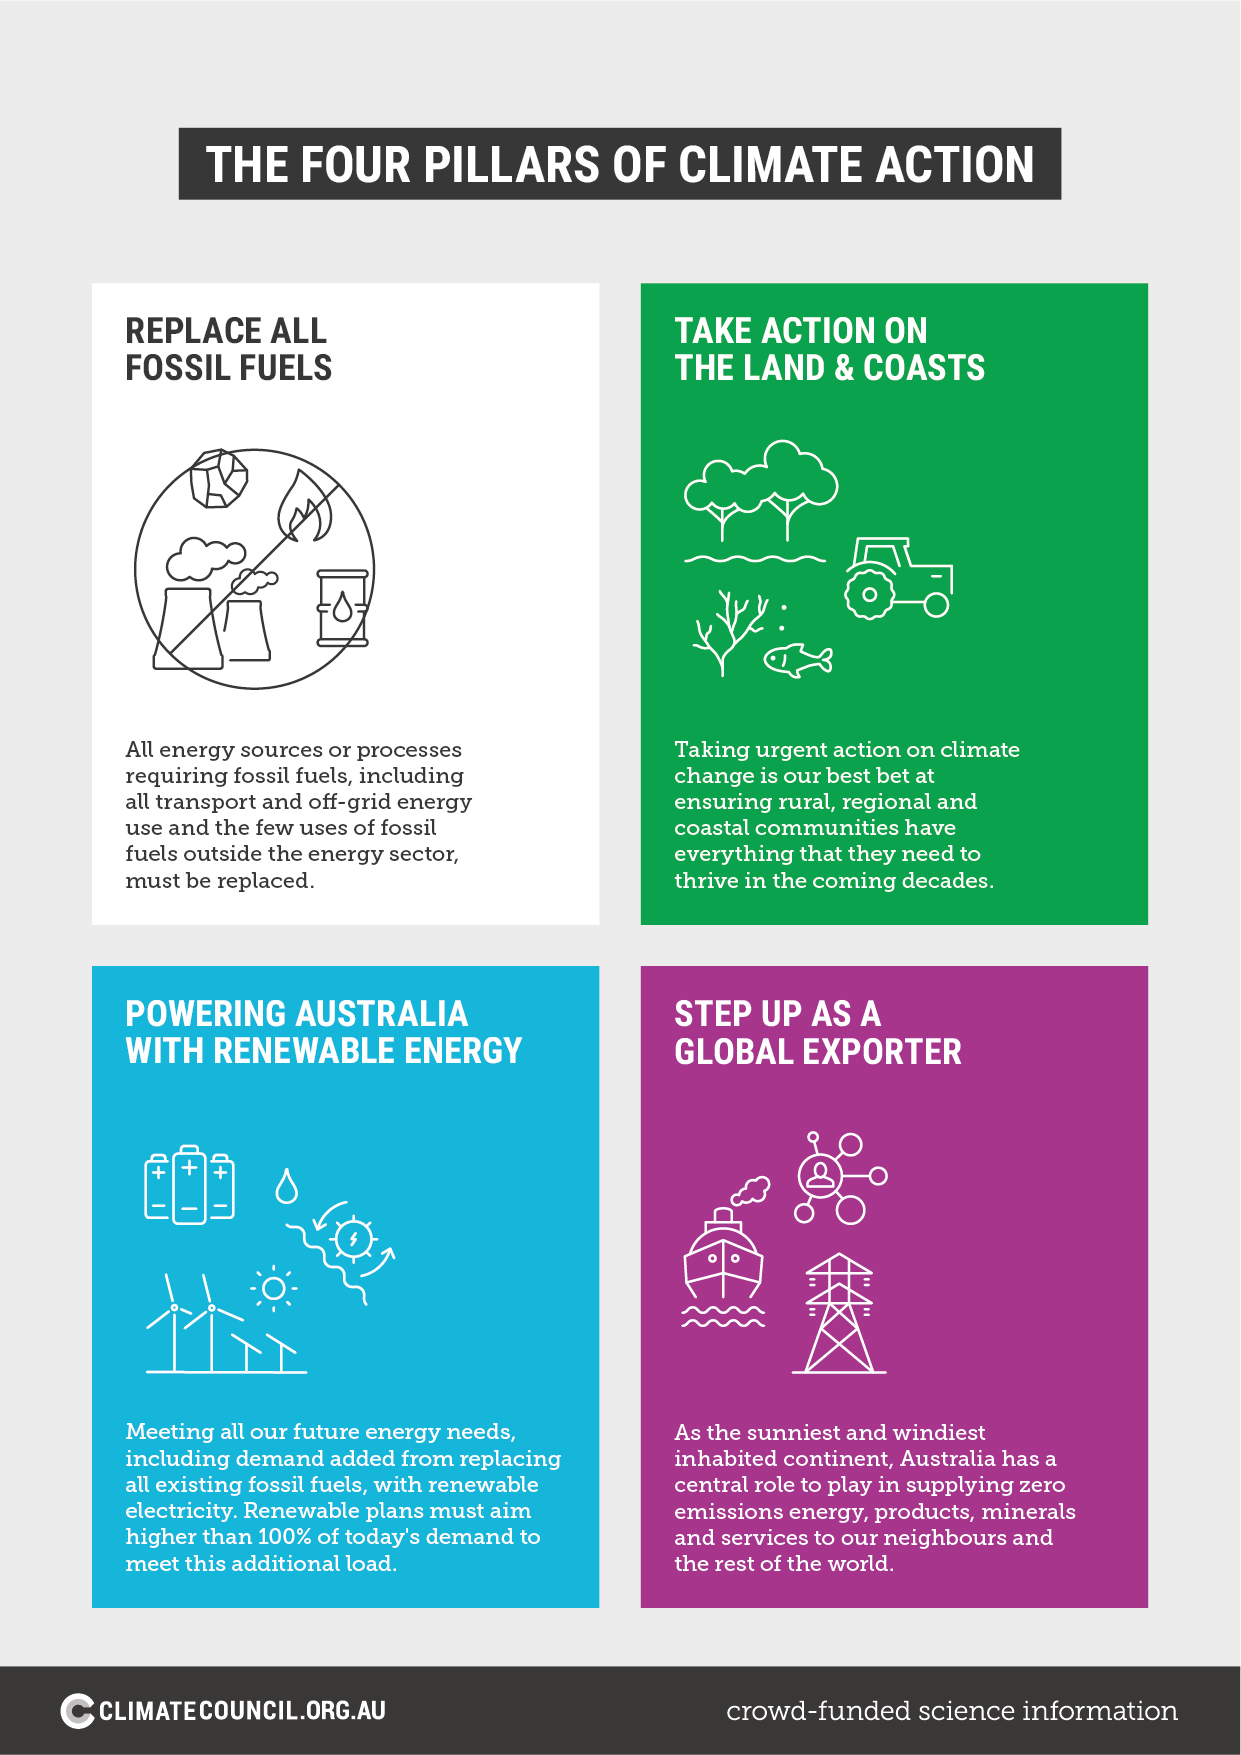 An infographic of the 4 pillars of climate action in Australia.